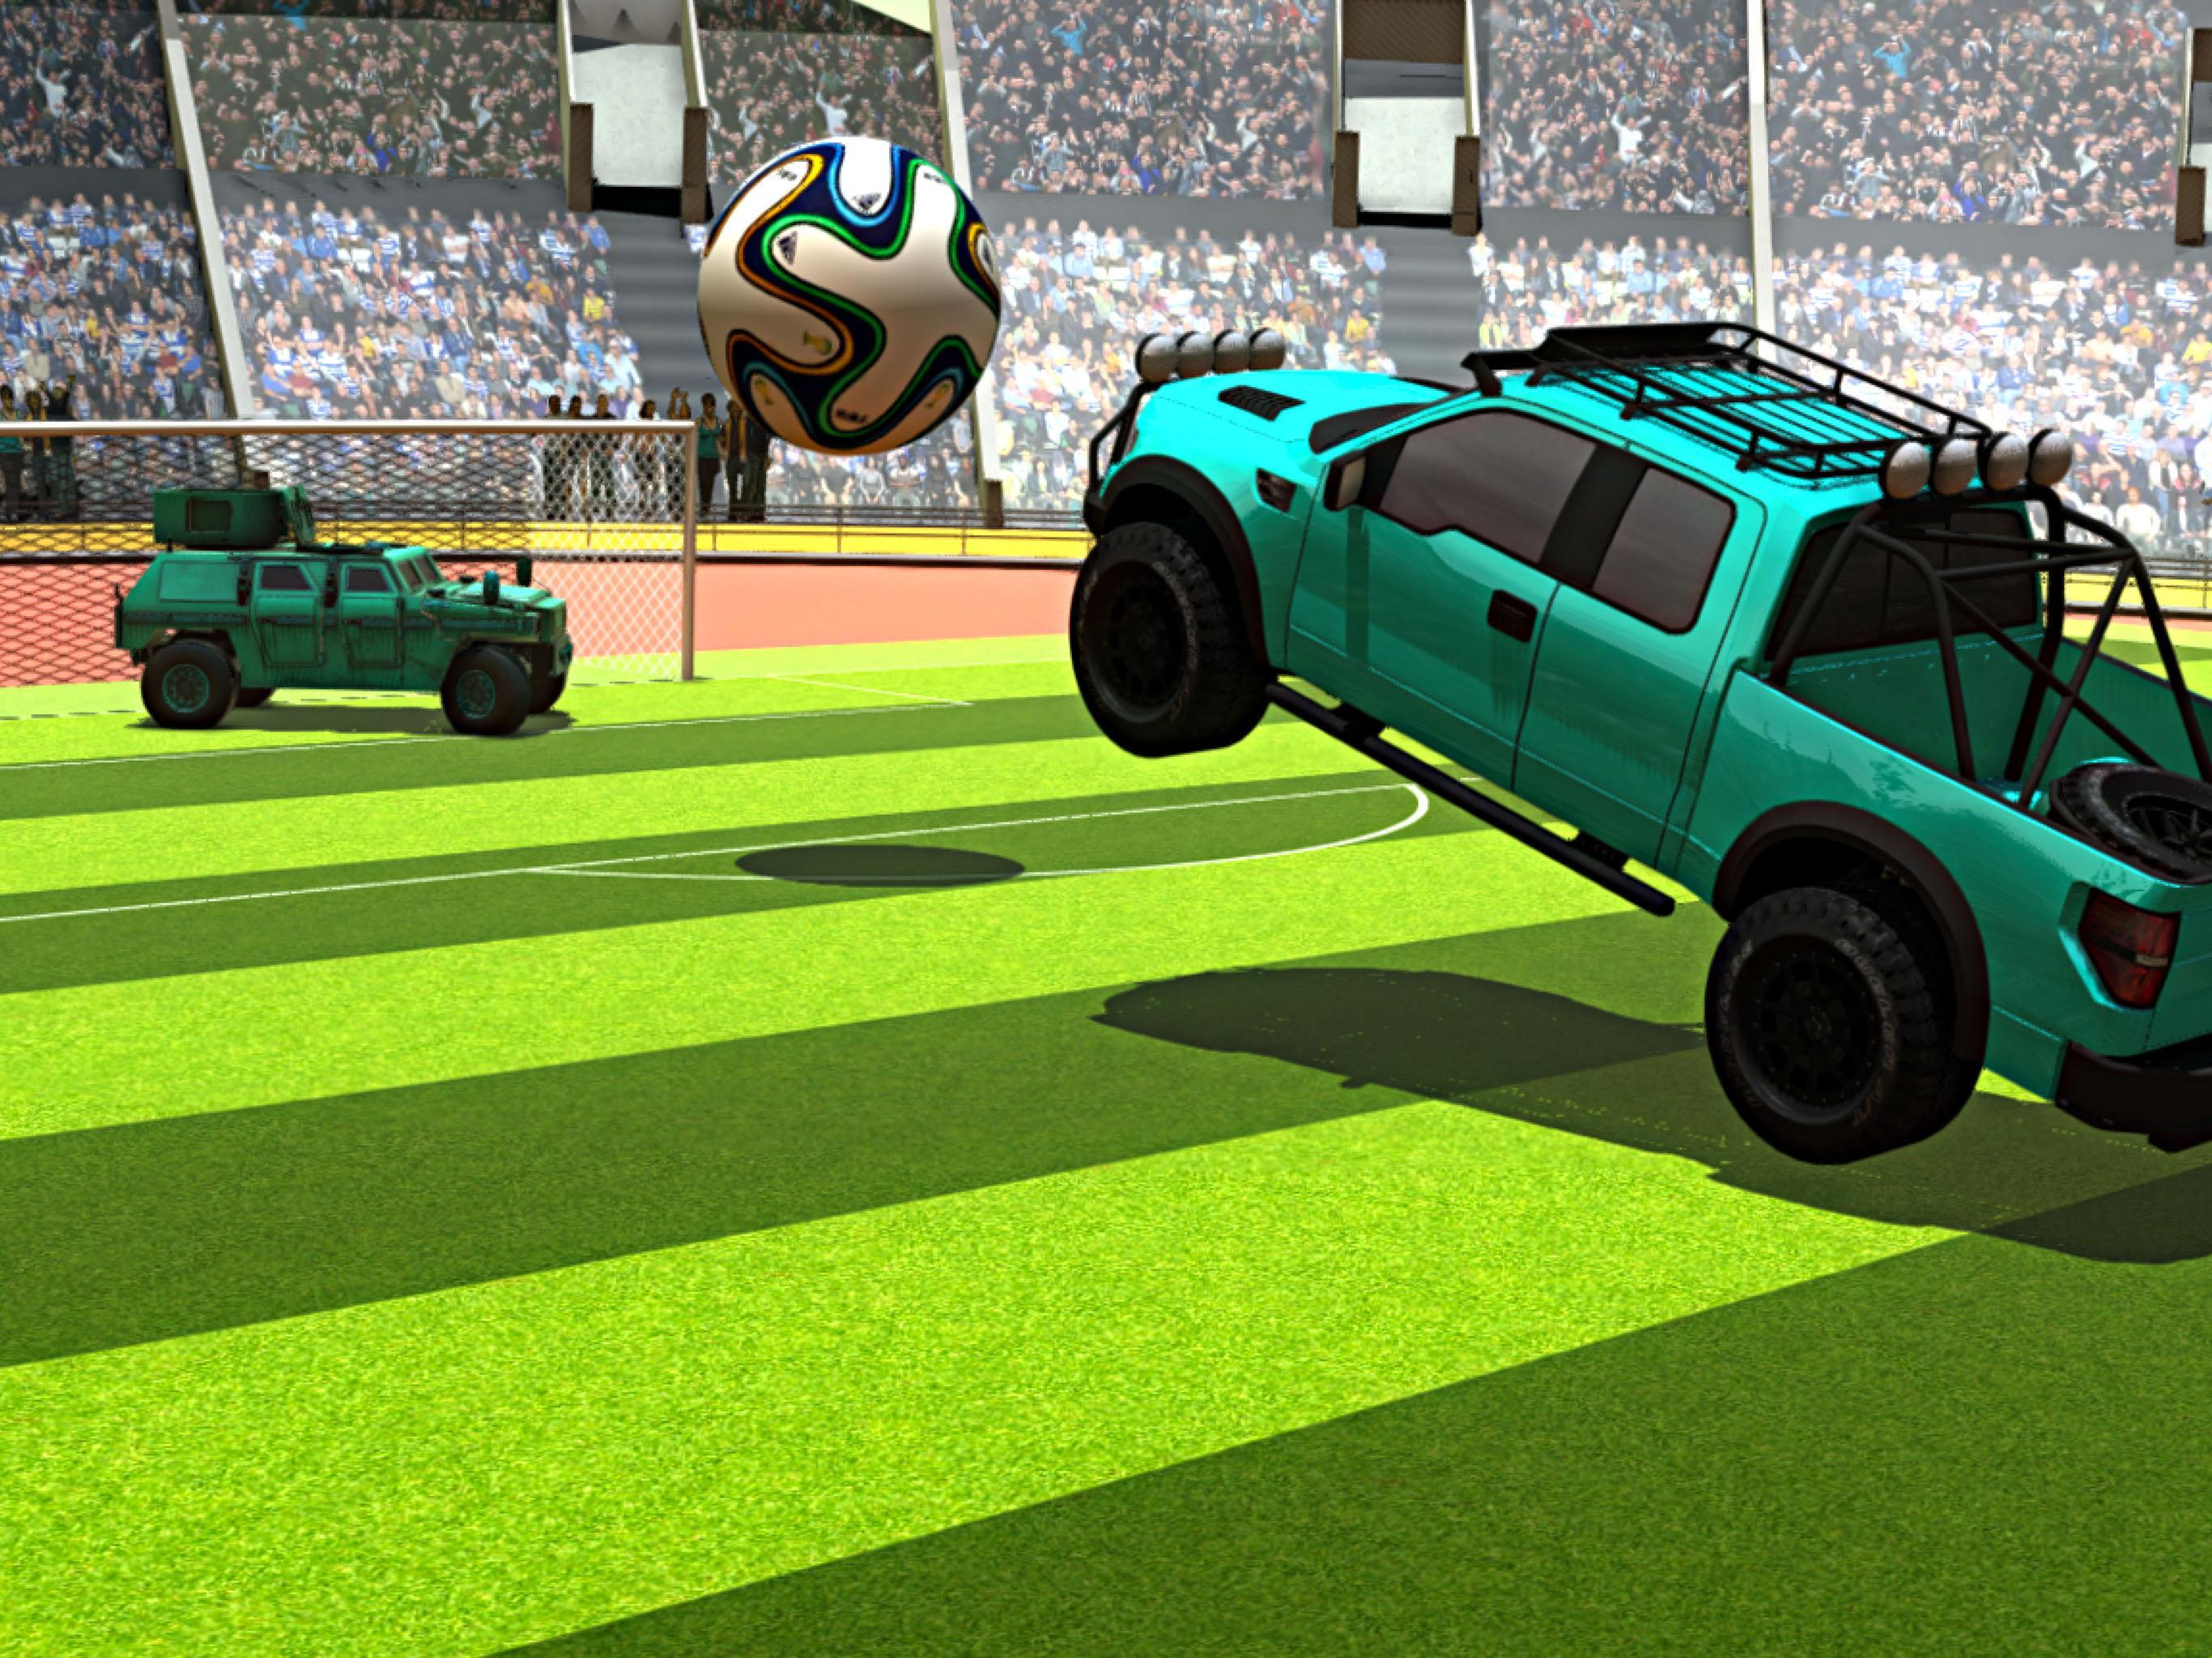 4x4 Car Soccer In Stadium 2016 for Android - APK Download